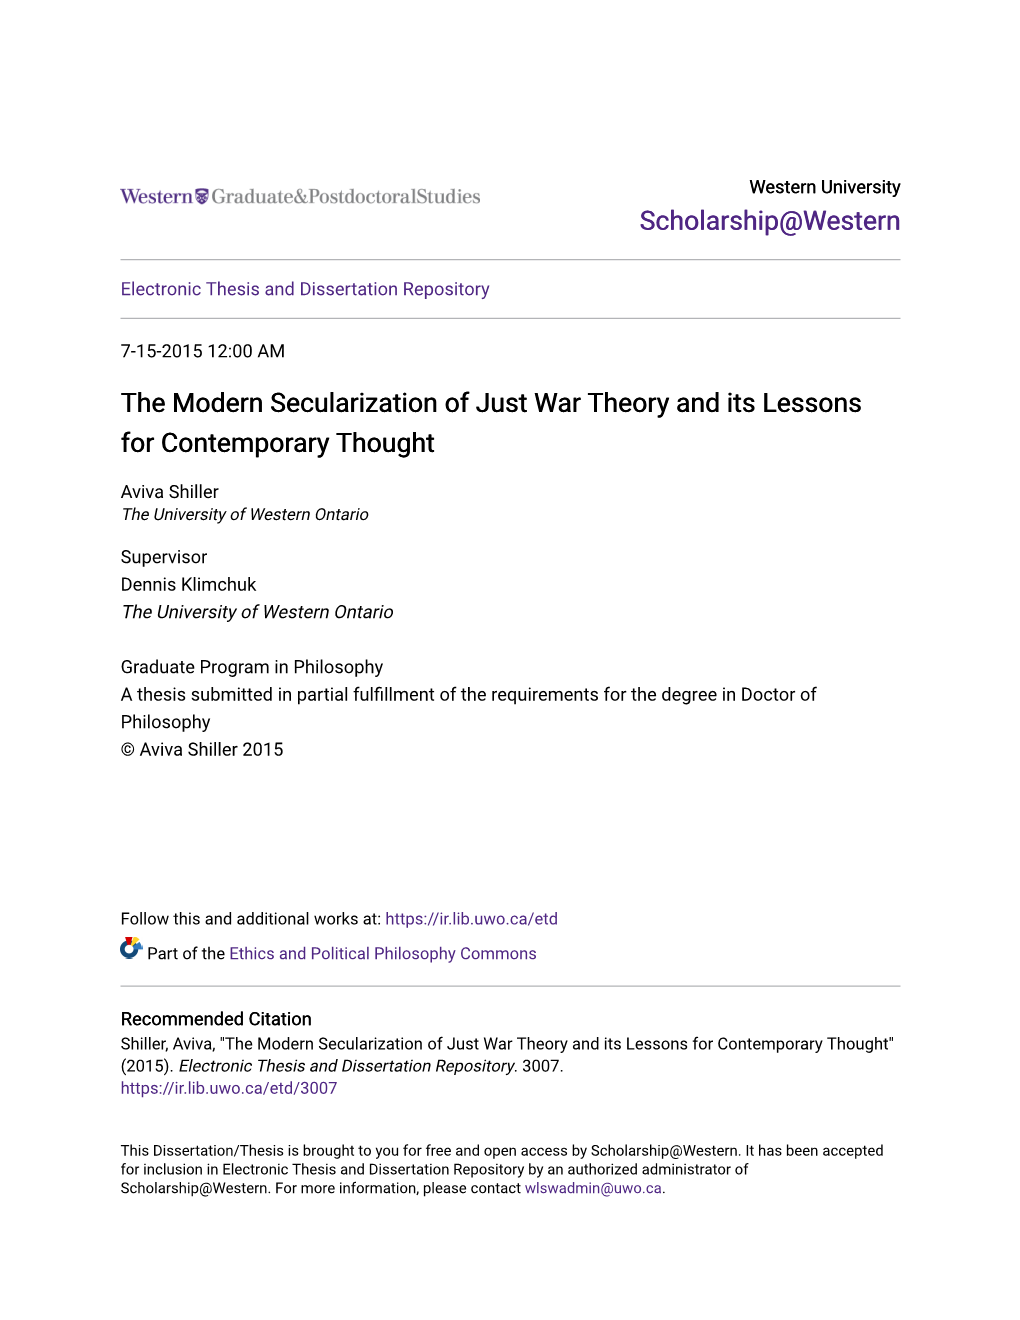 The Modern Secularization of Just War Theory and Its Lessons for Contemporary Thought